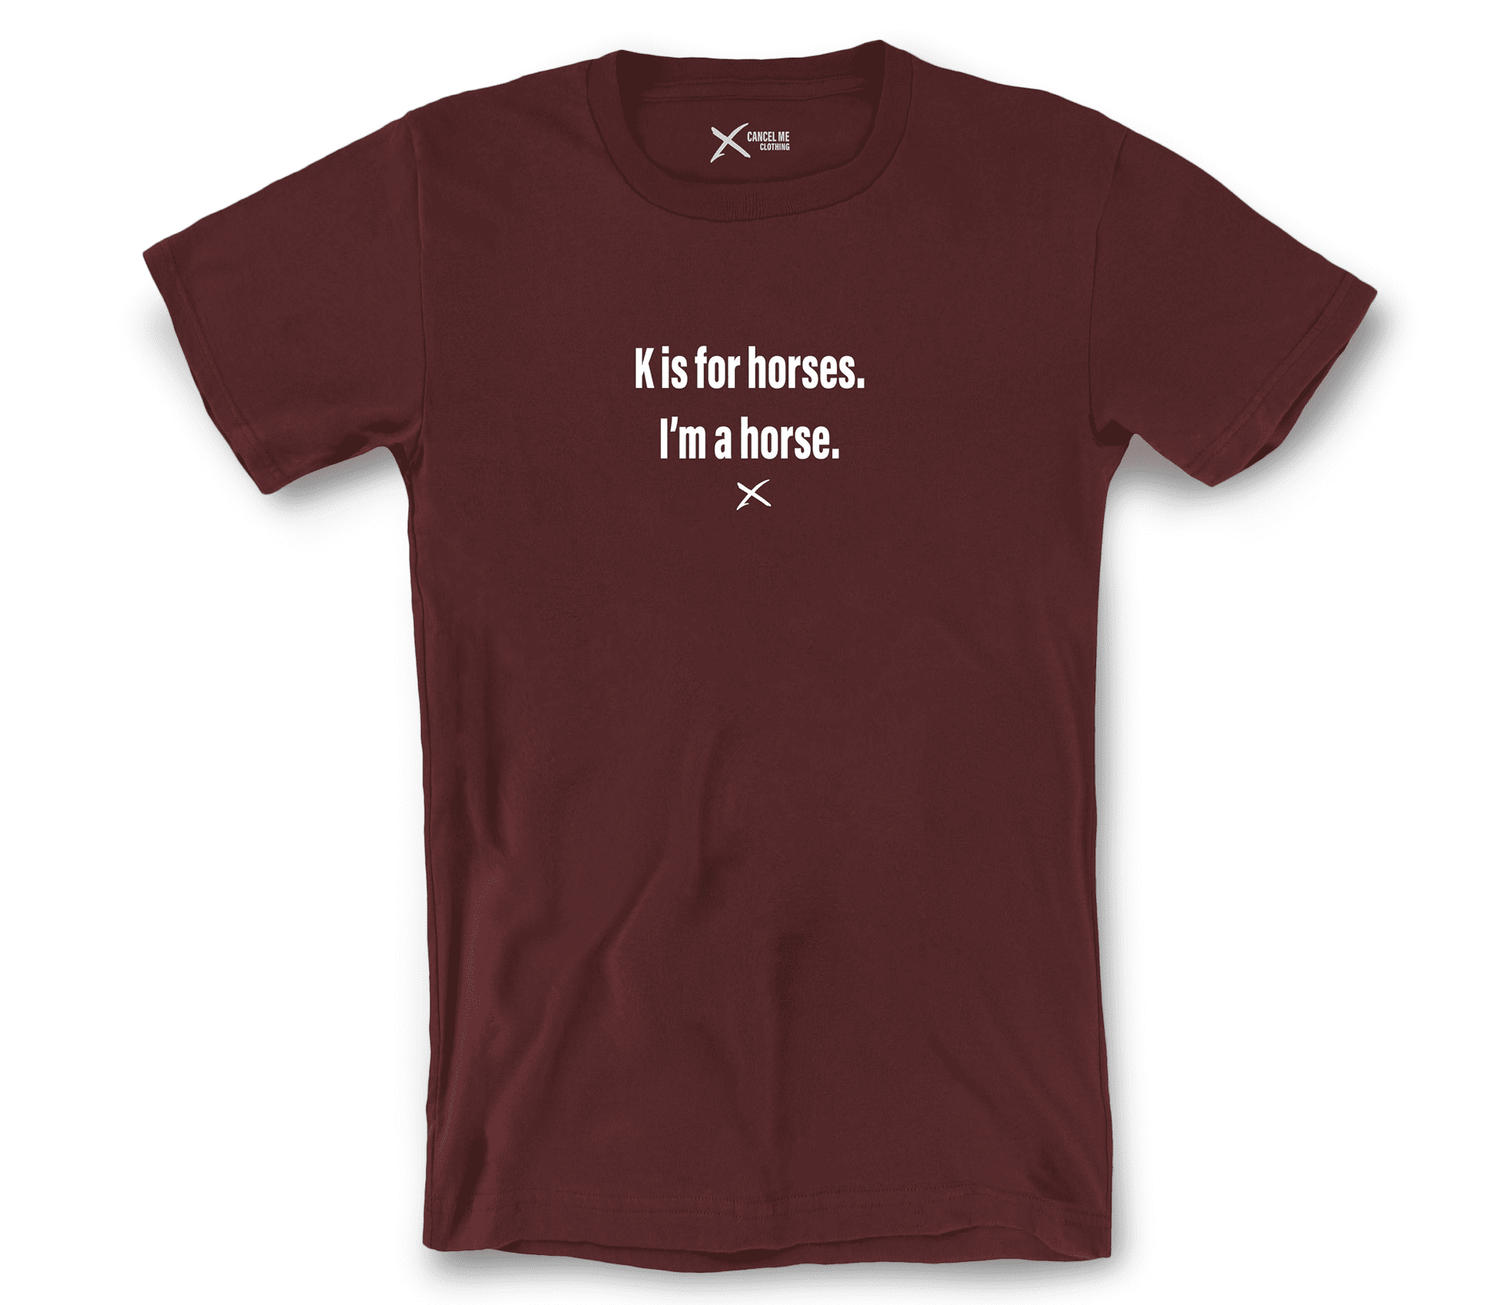 lp-pets_animals_2-shirt_7791713845418_k-is-for-horses-im-a-horse-shirt_Maroon.png